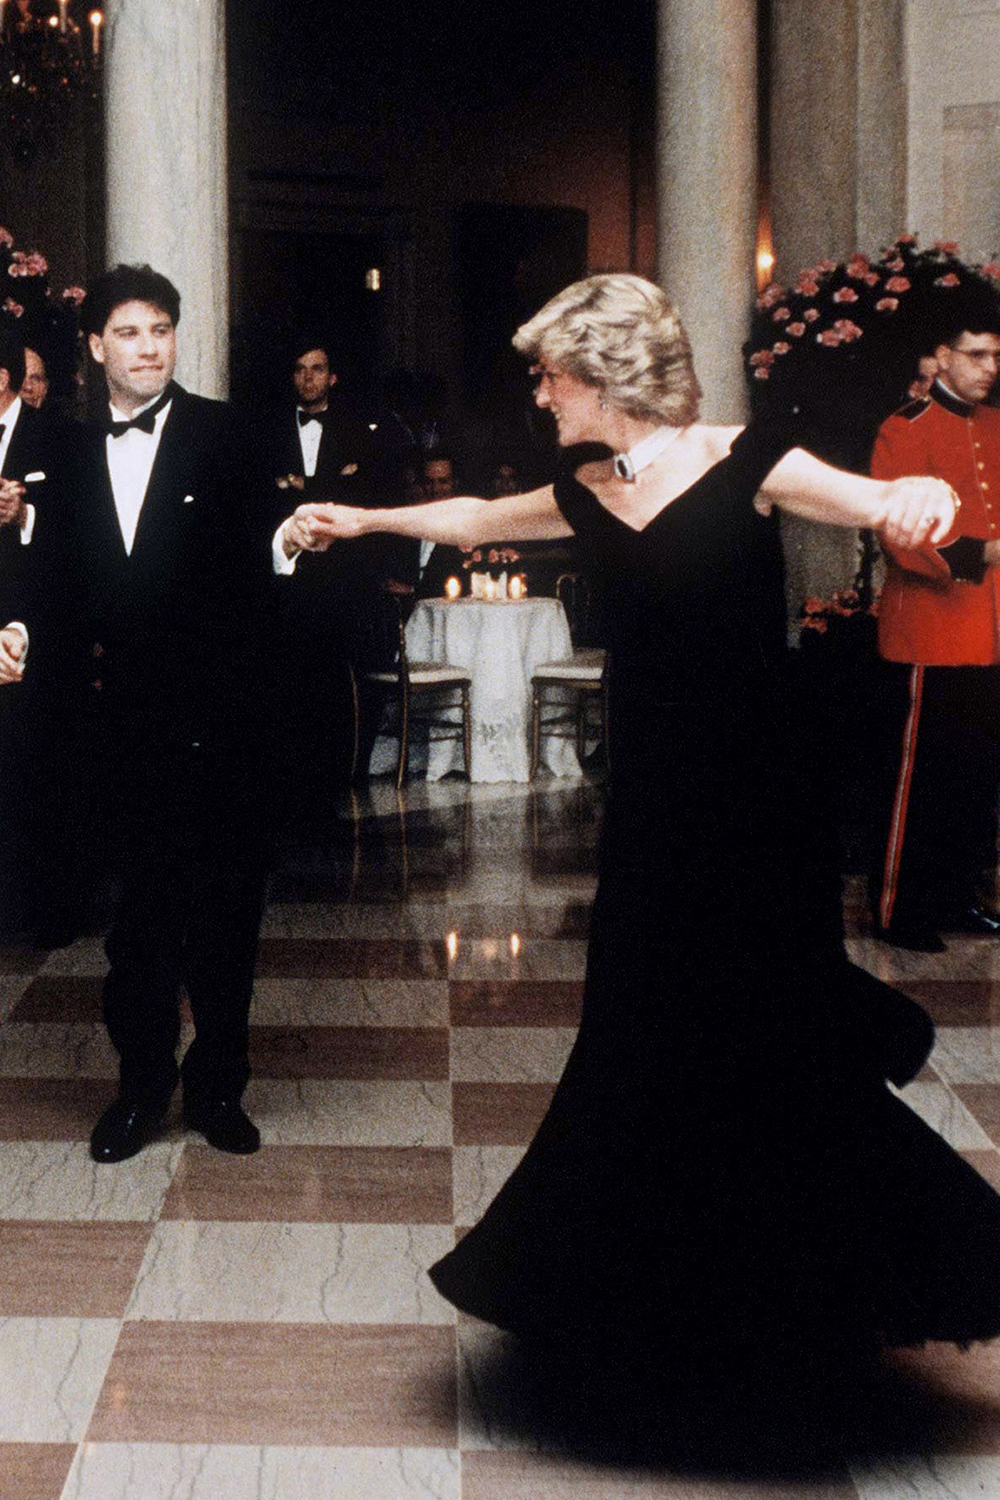 November 9th, 1985 - Princess Diana dances with John Travolta at the White house during their American visit. She wears a gown by Victor Edelstein.